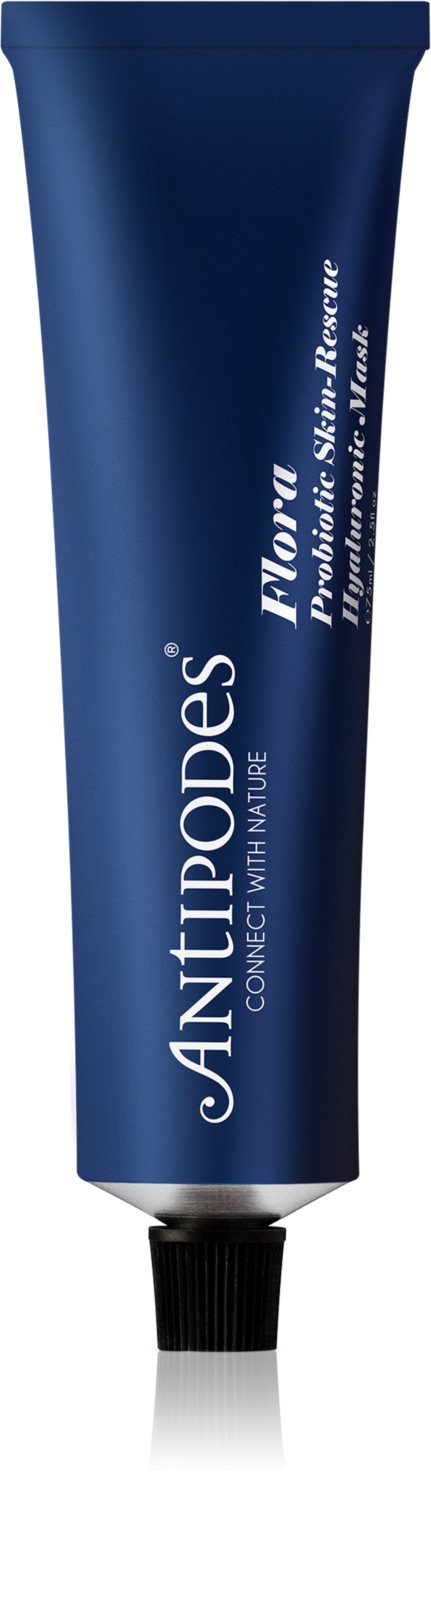 Antipodes Flora Probiotic Skin Rescue Hyaluronic Mask 75ml